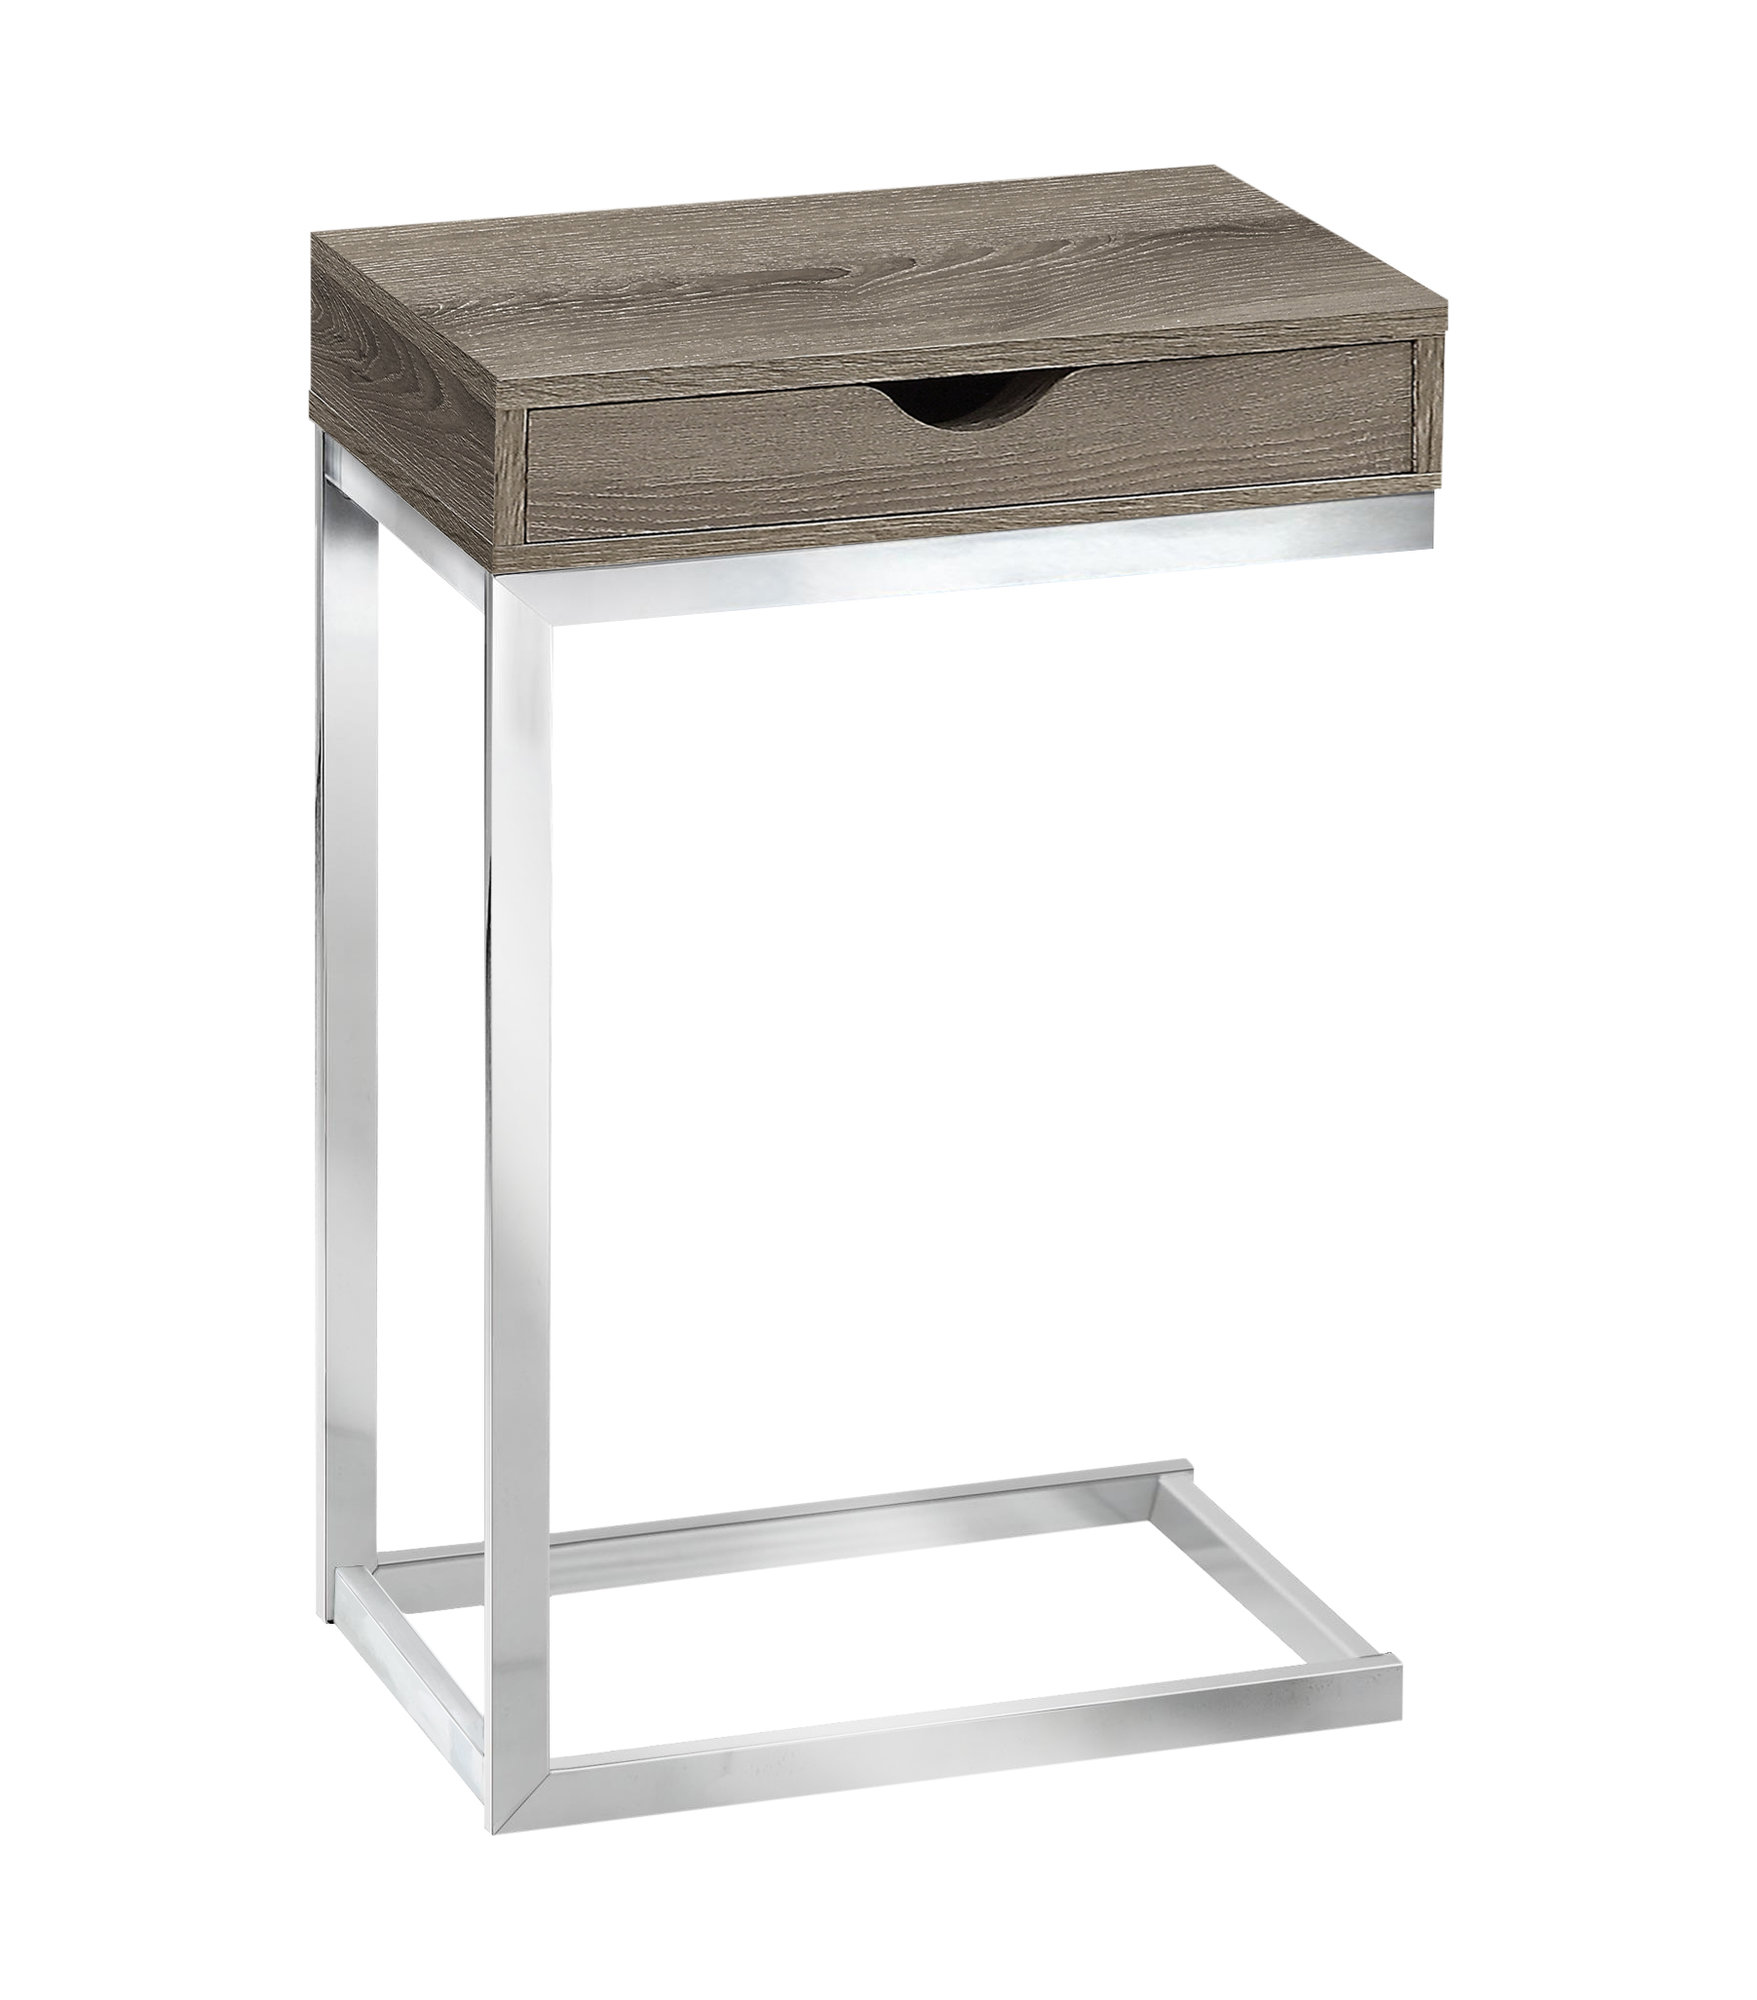 10.25" x 15.75" x 24.5" Dark Taupe Finish Metal Accent Table